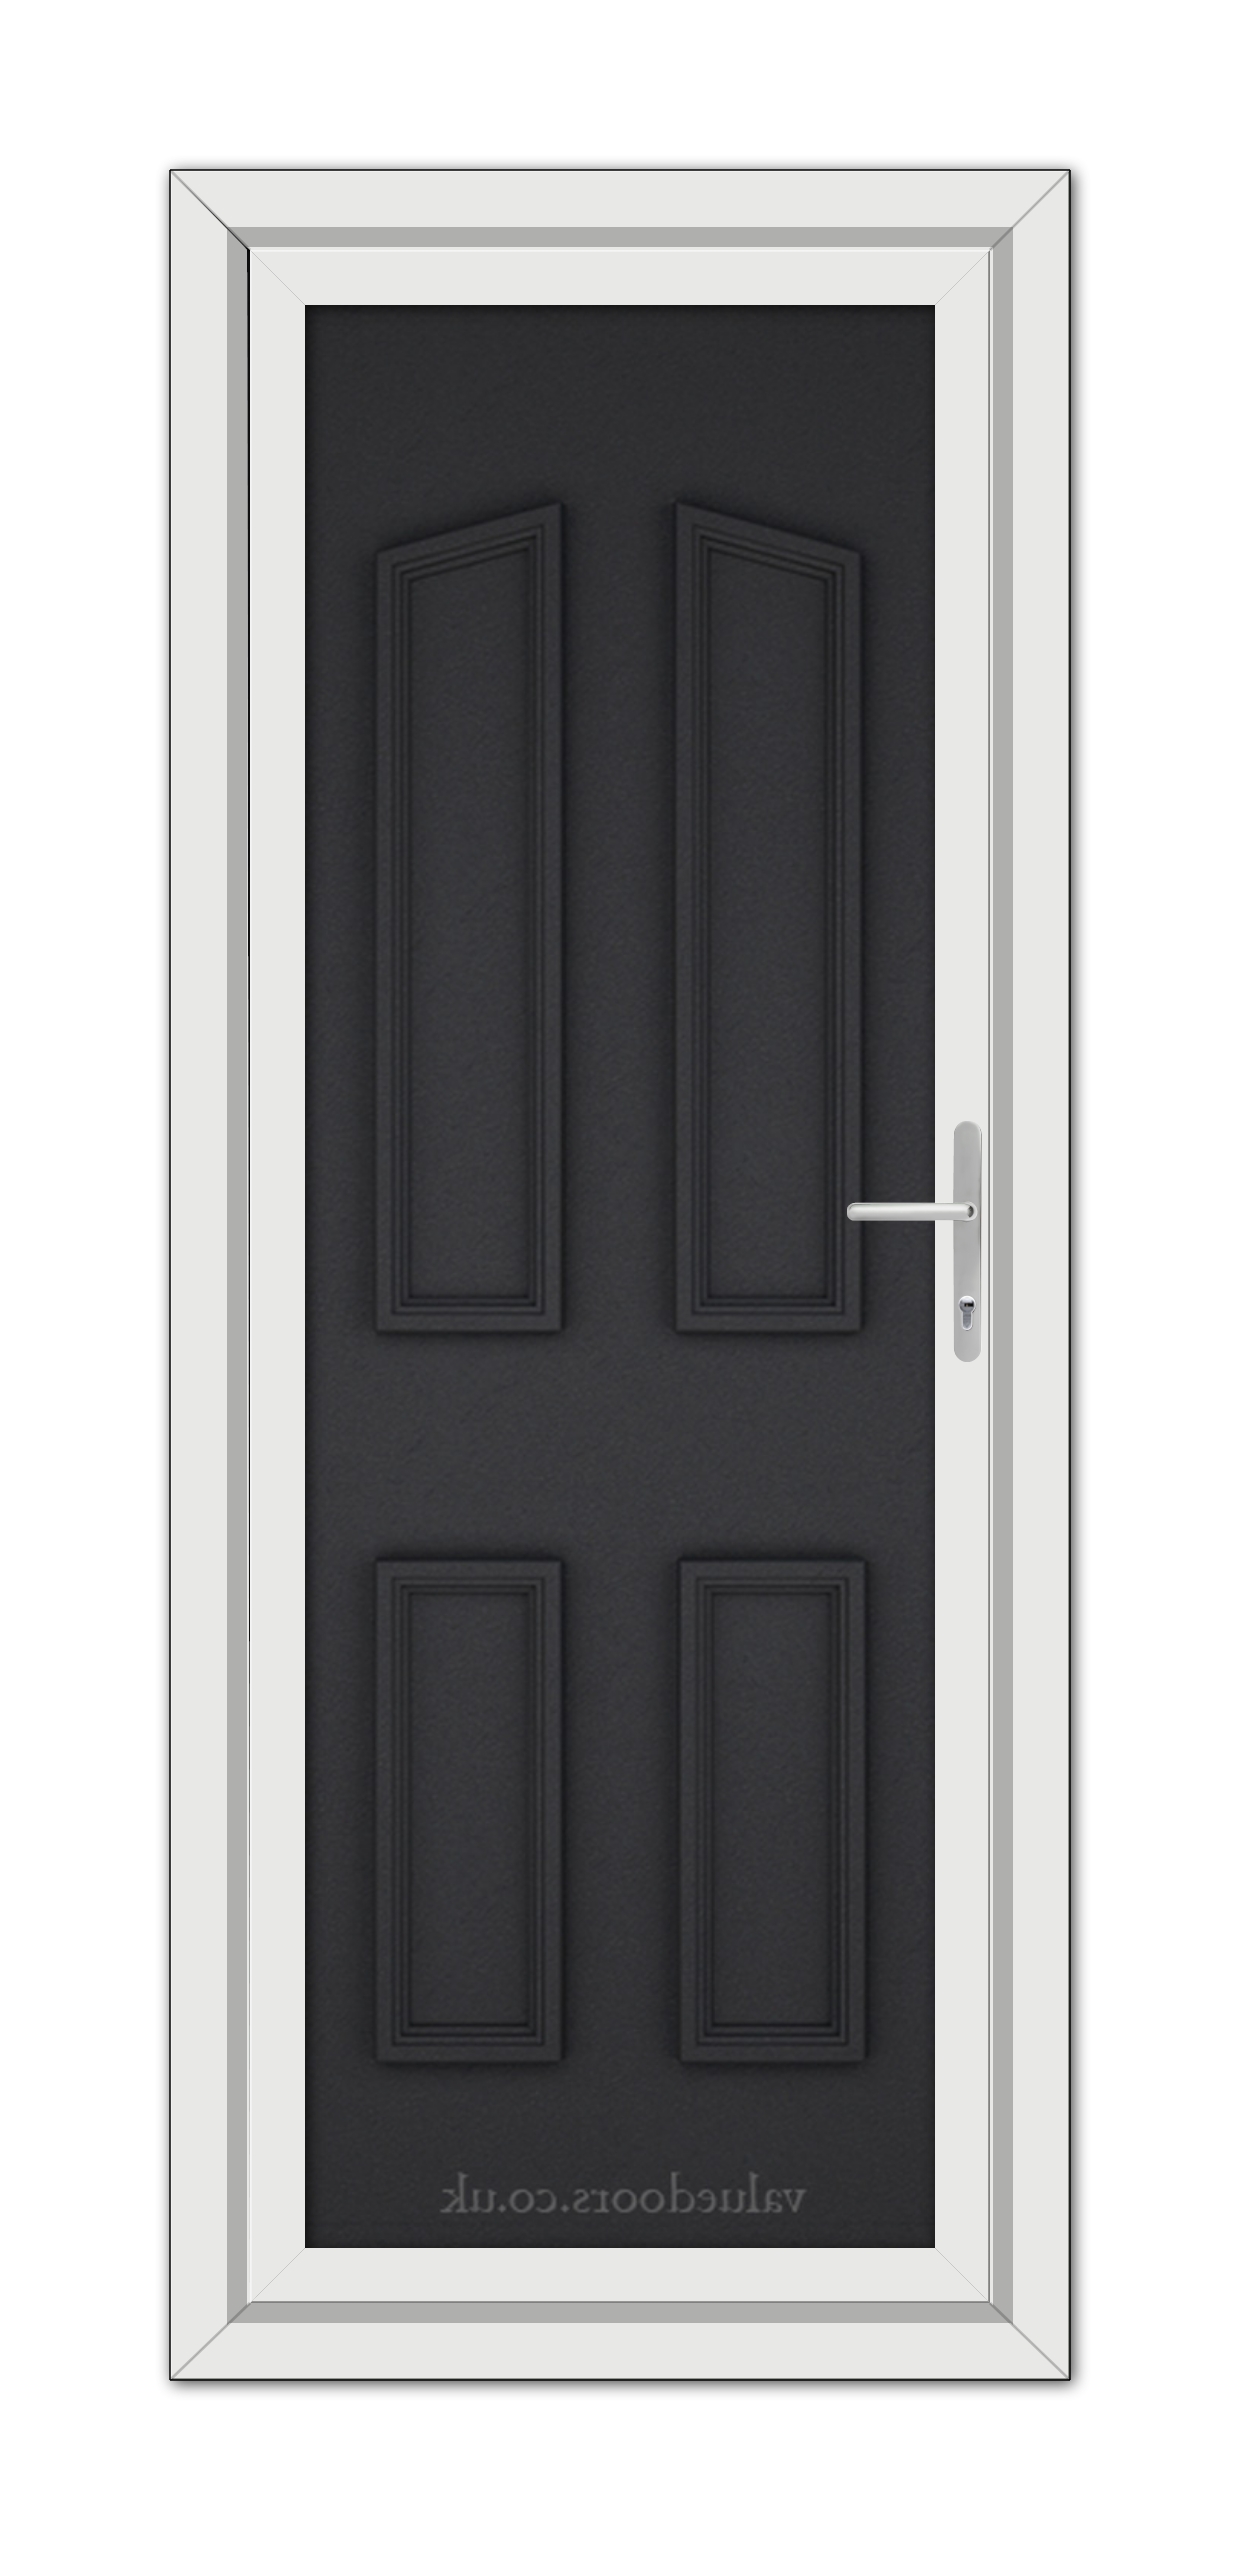 A vertical image of a modern Black Brown Kensington Solid uPVC Door with a white frame, featuring a silver handle on the right side.